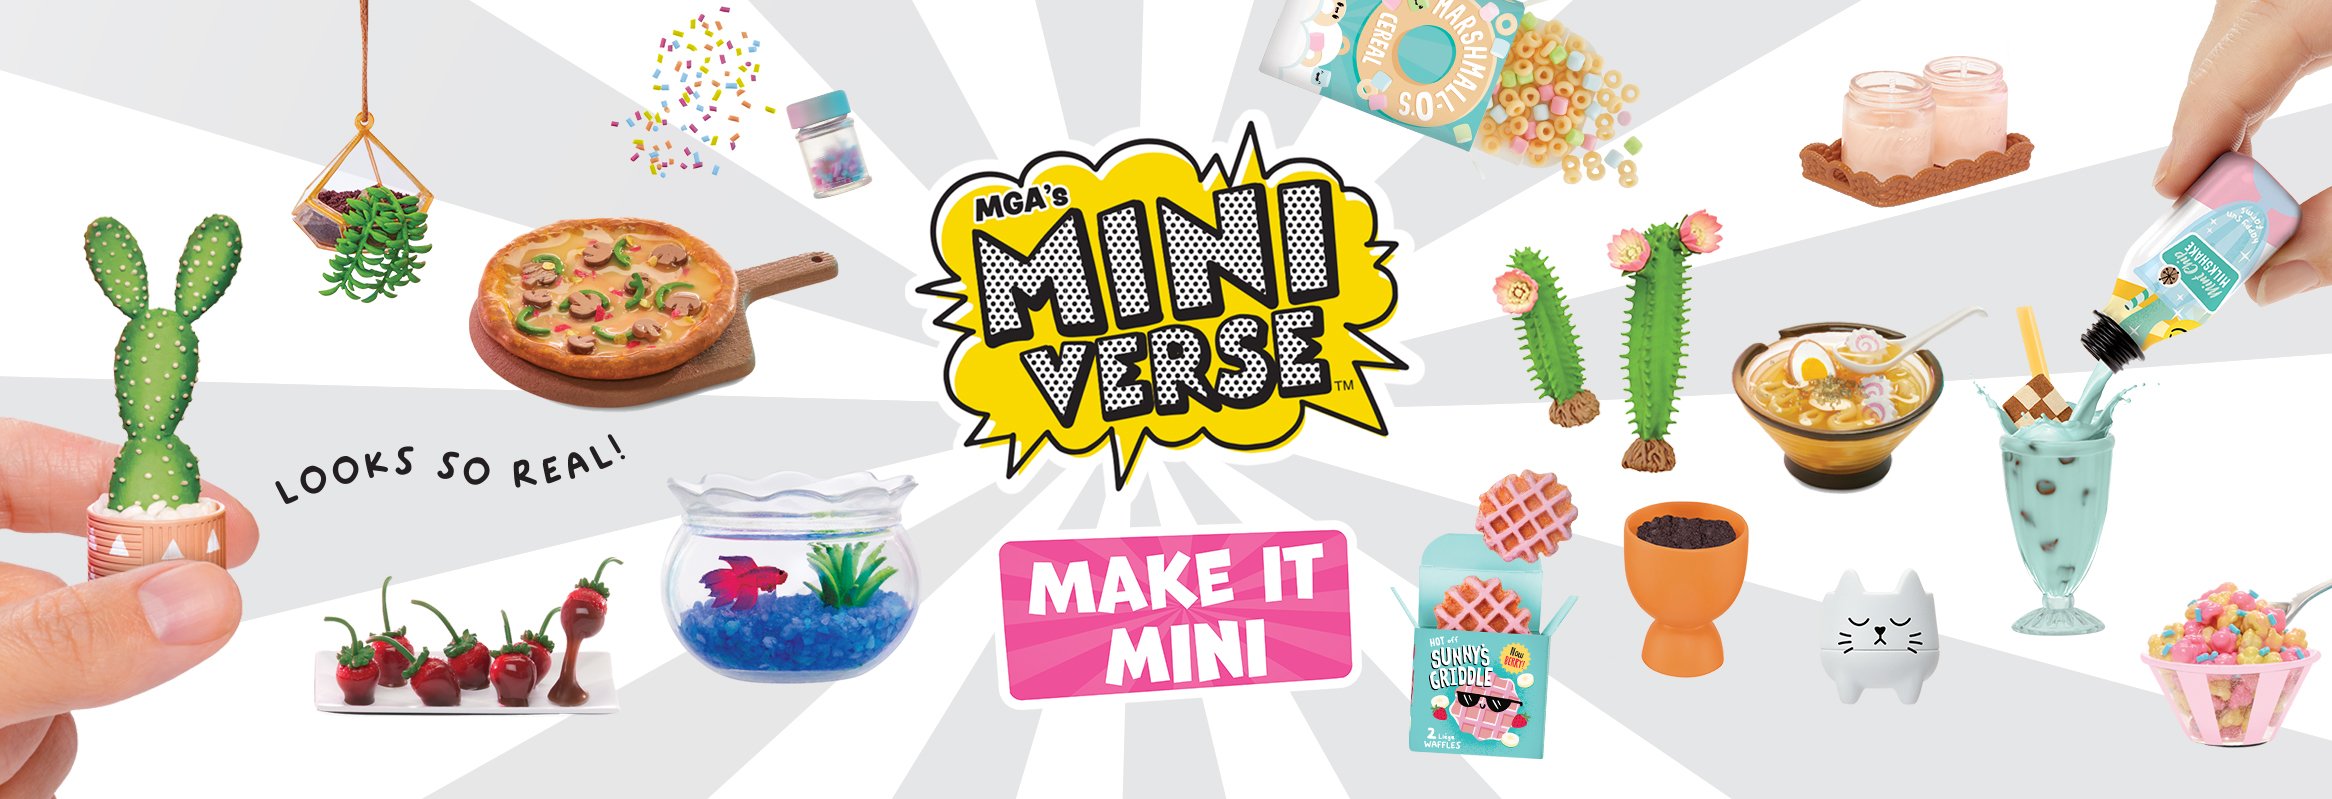 Be in to WIN with Miniverse!